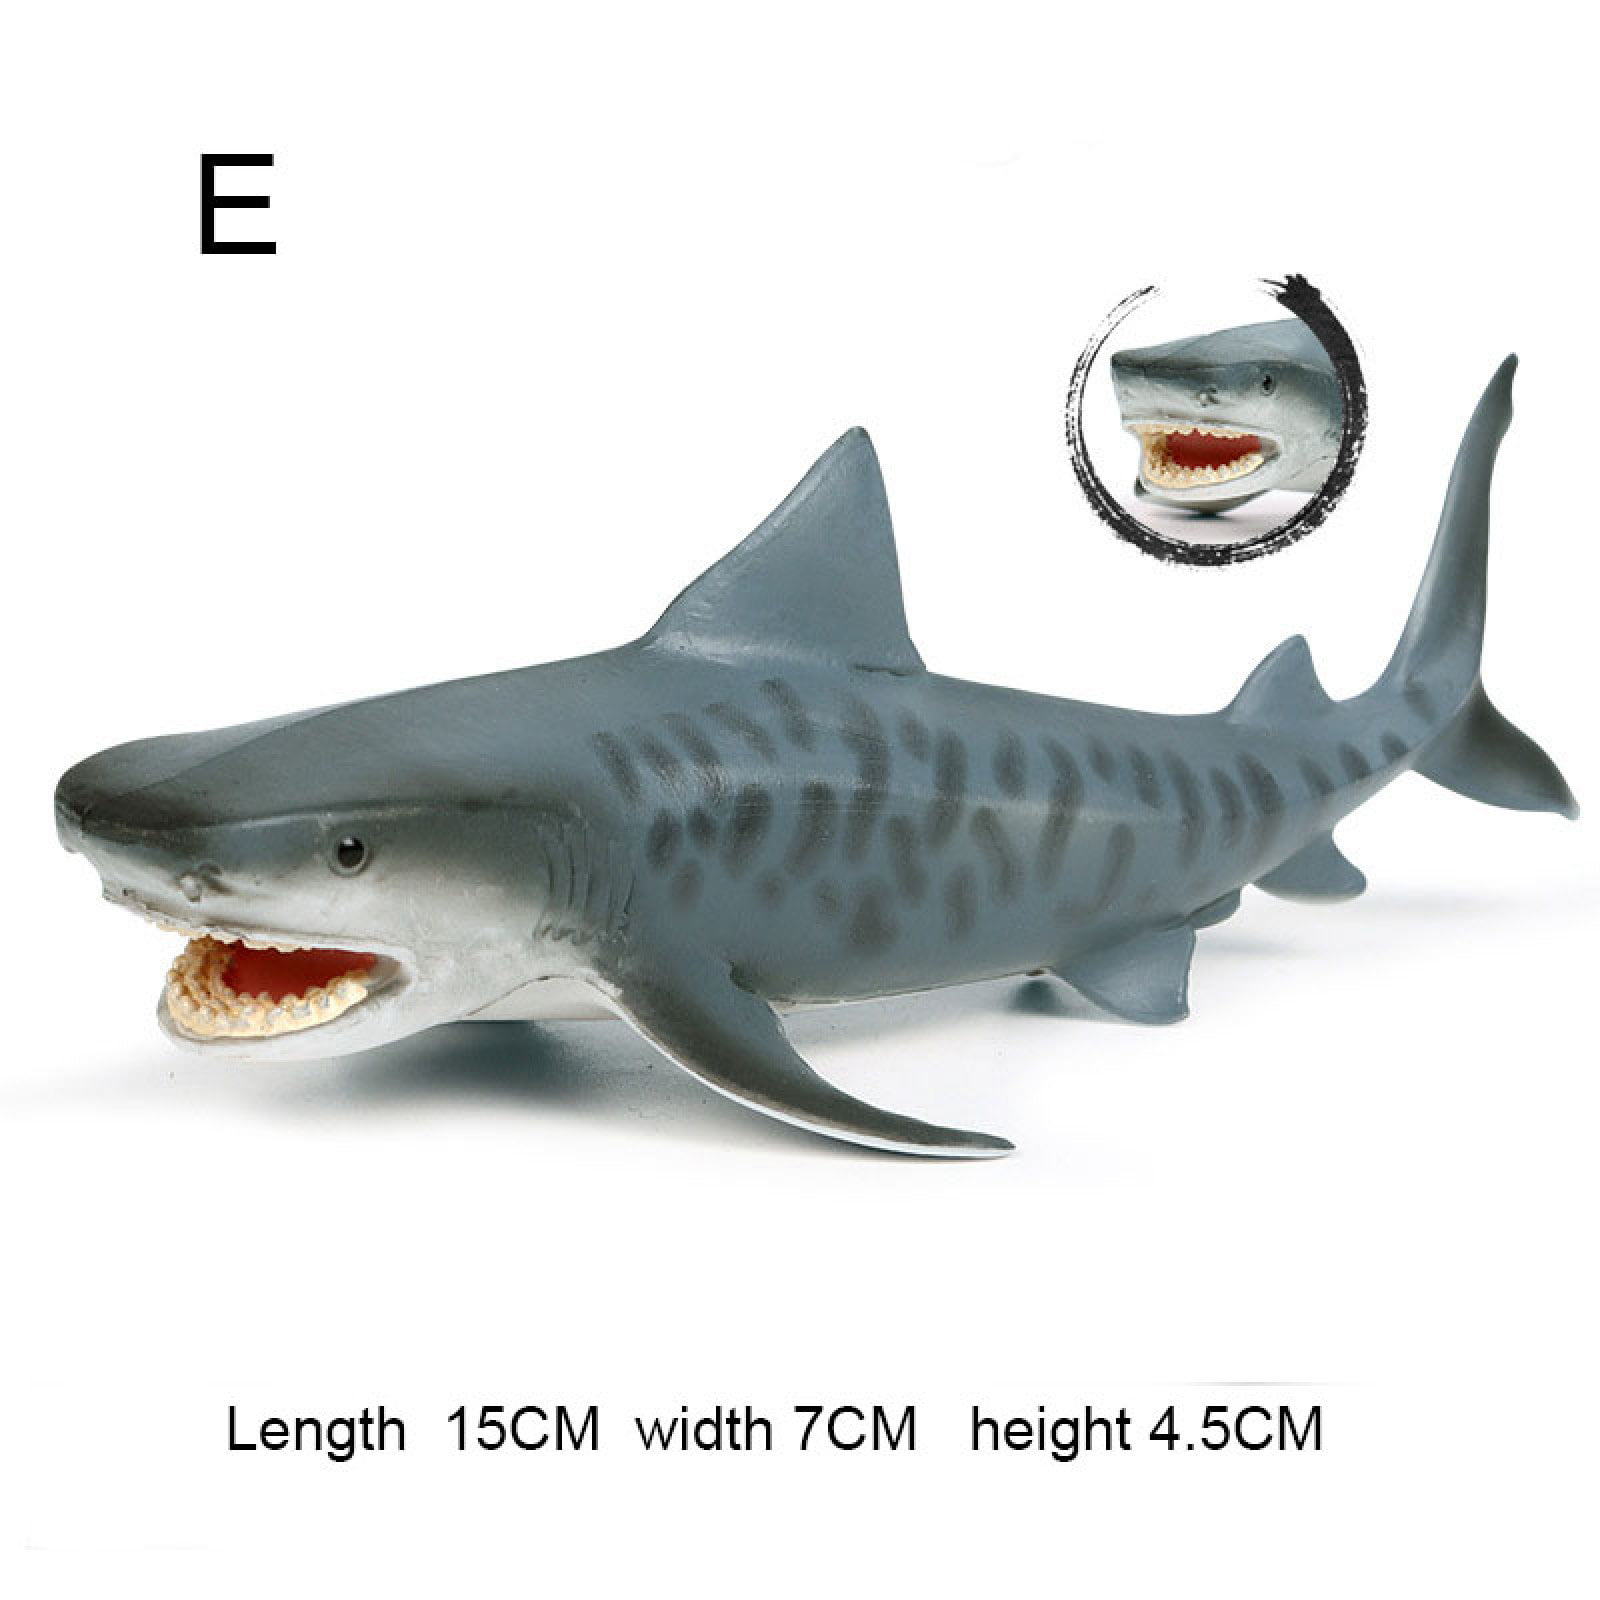 Details about   1xLifelike Shark Shaped Toy Realistic Motion Simulation Animal Gift Kids L0Z1 